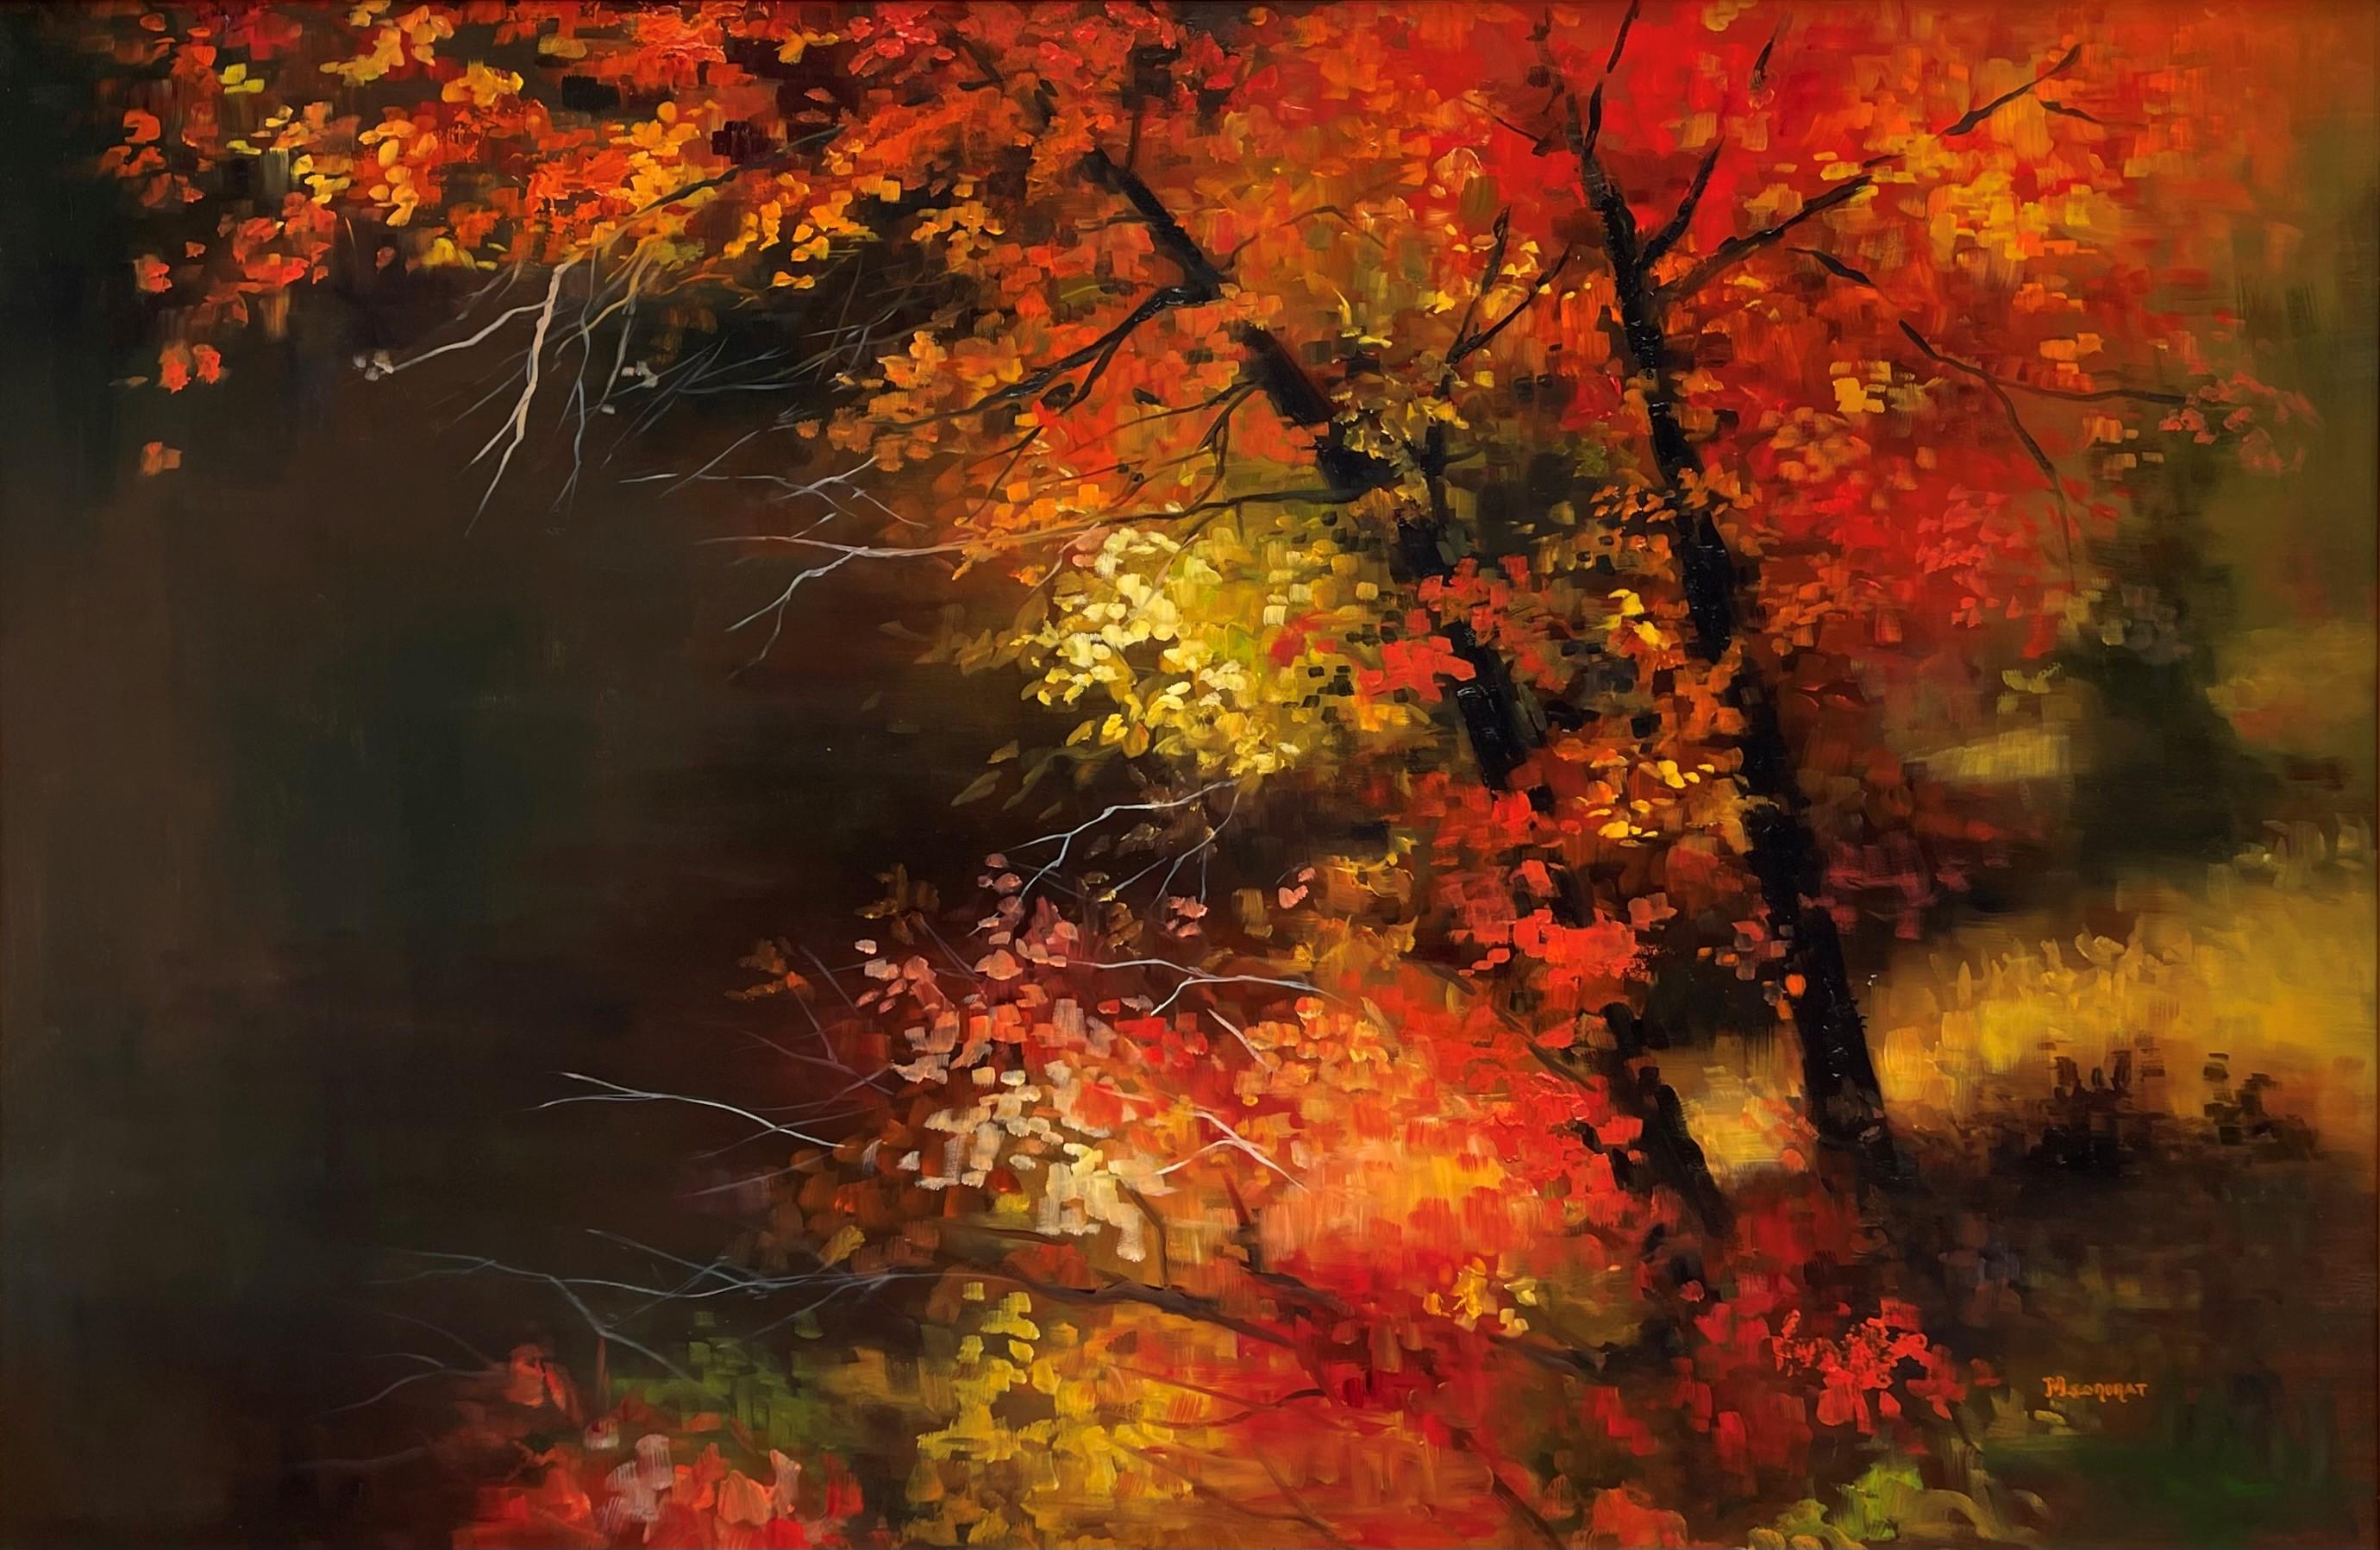 Michelle Condrat Landscape Painting - "Autumn Flare" Autumn Landscape Oil painting with Red and Yellow Leaves